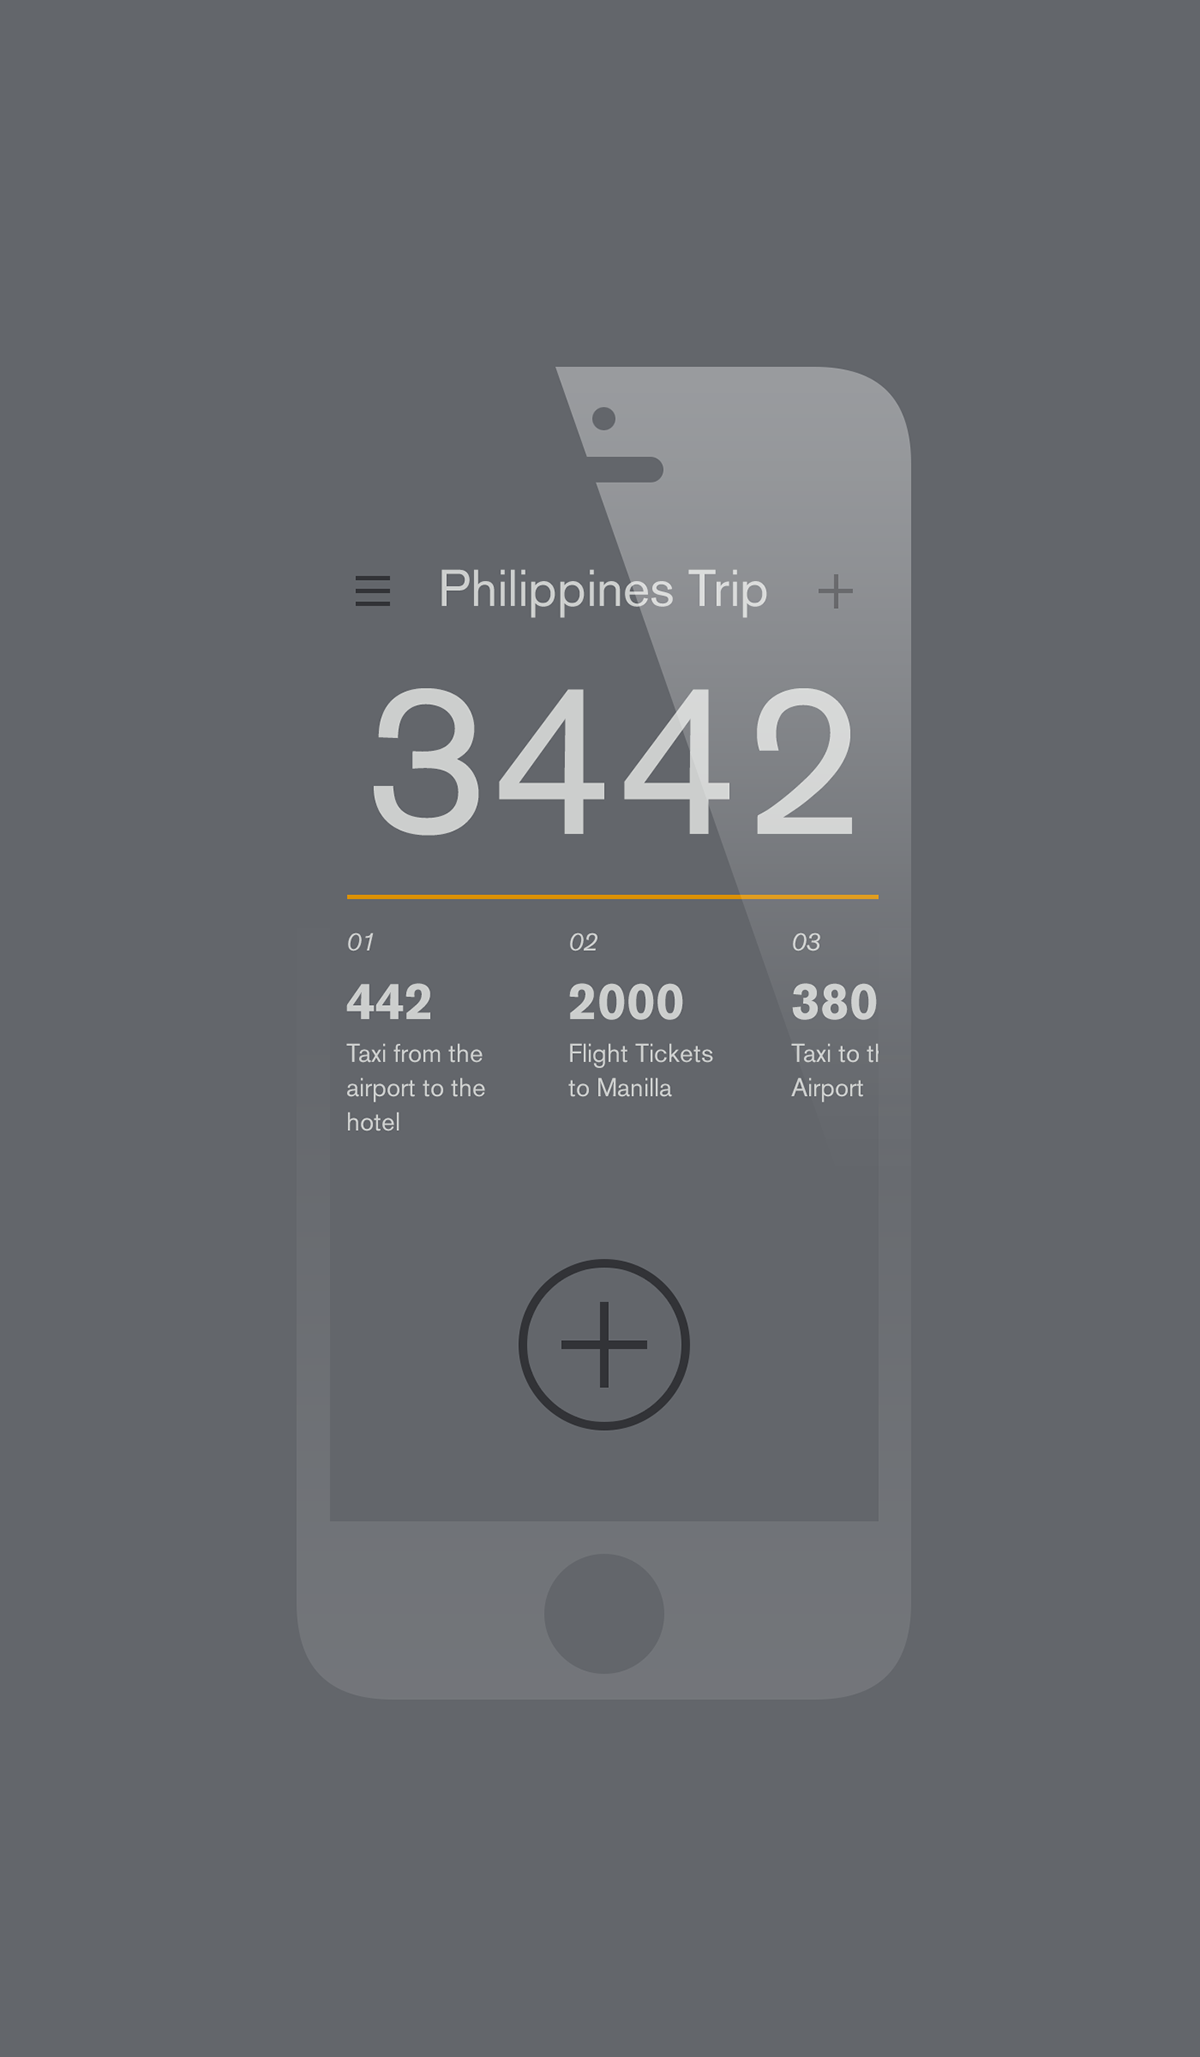 iphone app tracker number keeper add numbers lists number lists bangalore India calories score taxi expense number